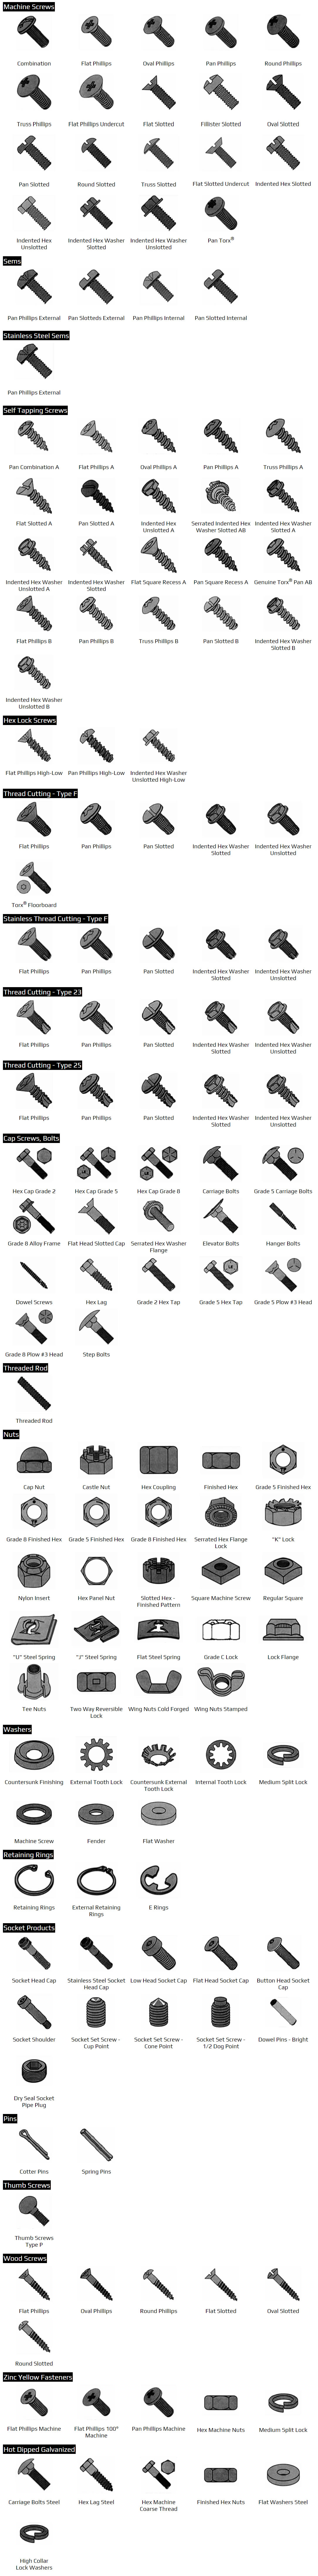 fastener-tech-data-charts-mack-fasteners-military-spec-fasteners-medical-device-fasteners